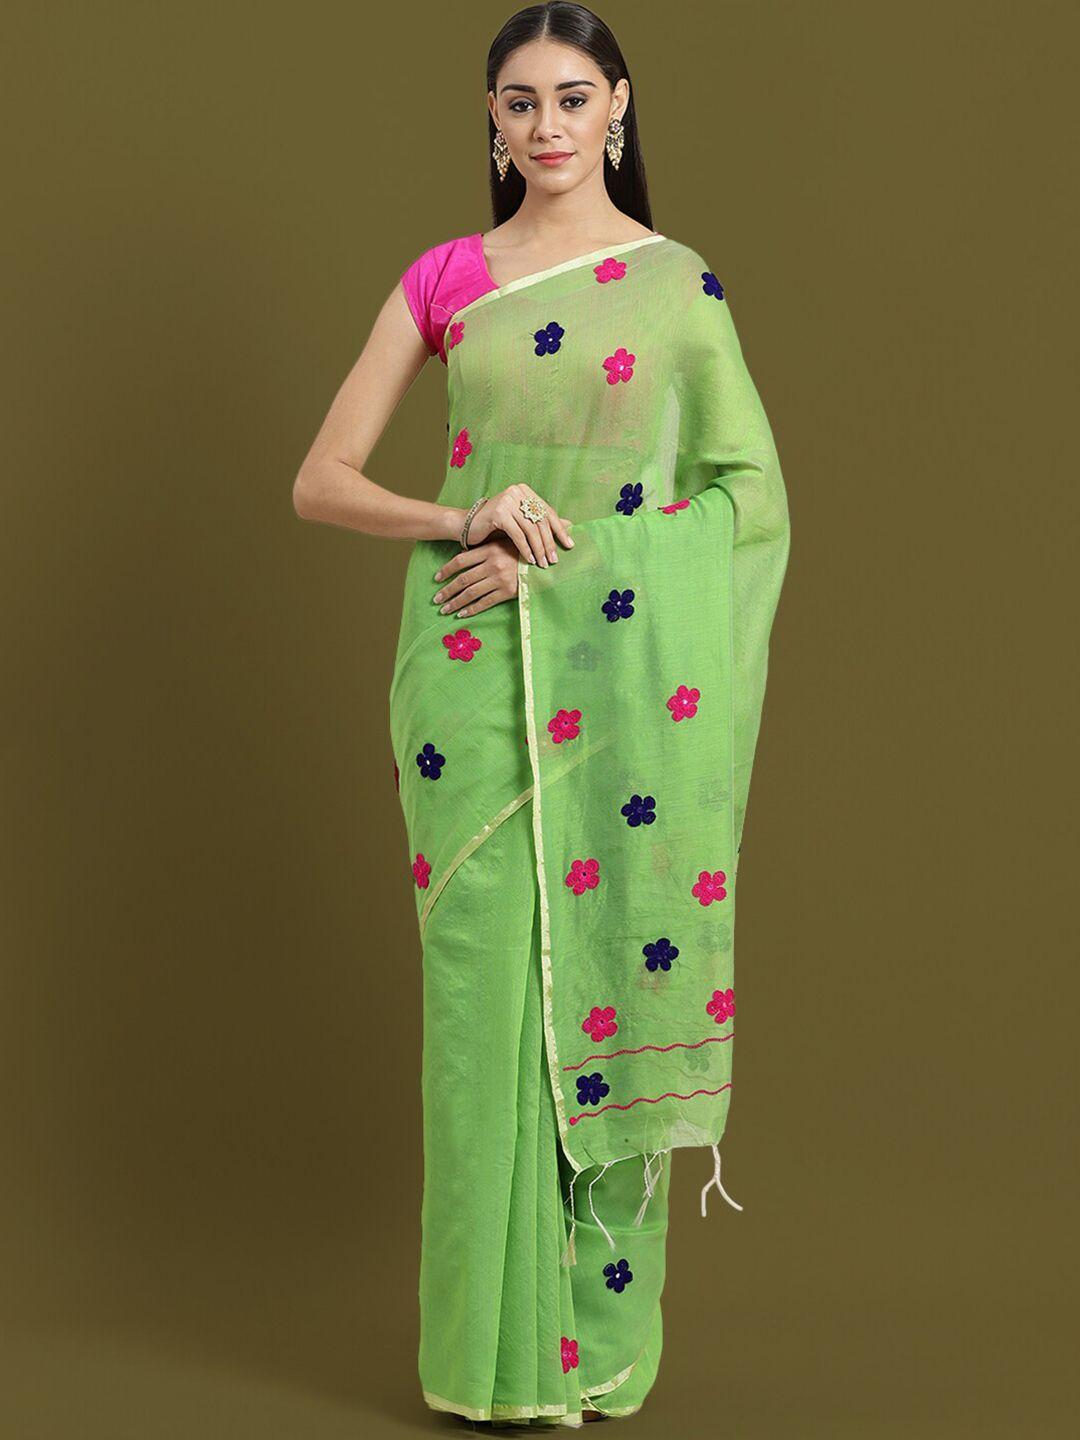 house-of-arli-floral-embroidered-saree